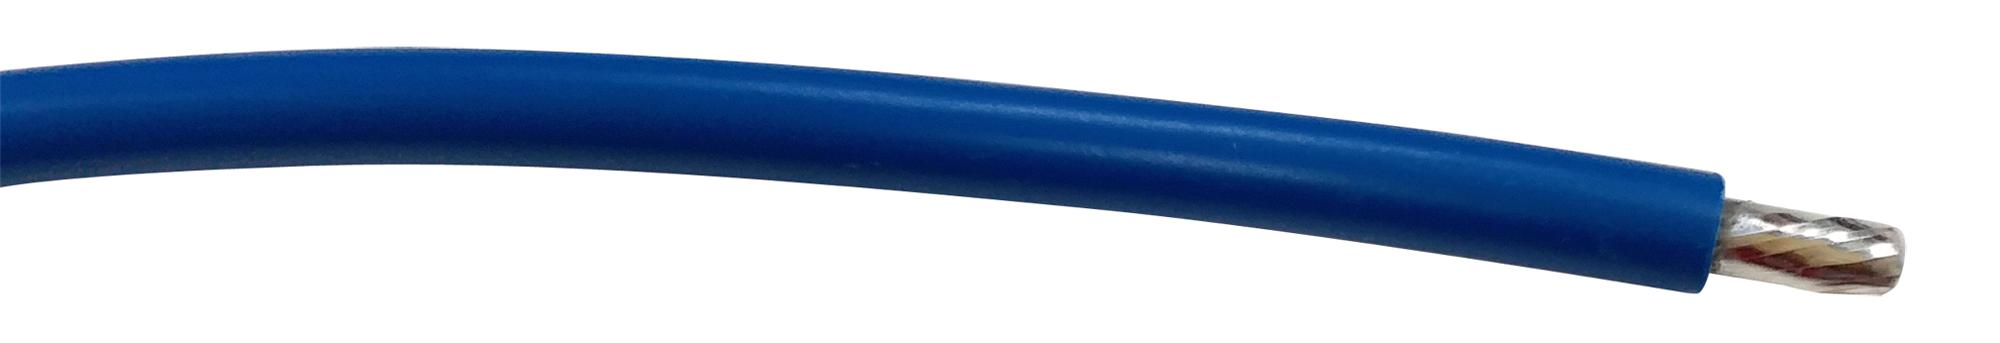 PP002516 CABLE WIRE, 16AWG, BLUE, 305M PRO POWER